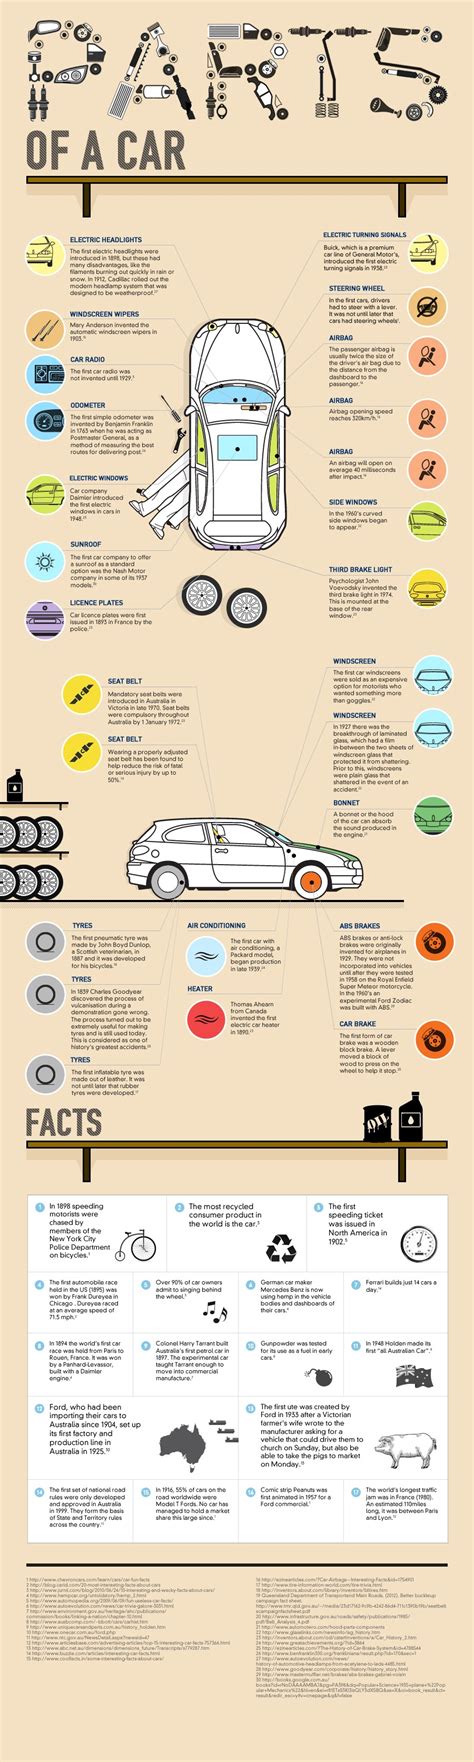 Fun Facts About The History Of Cars Infographic